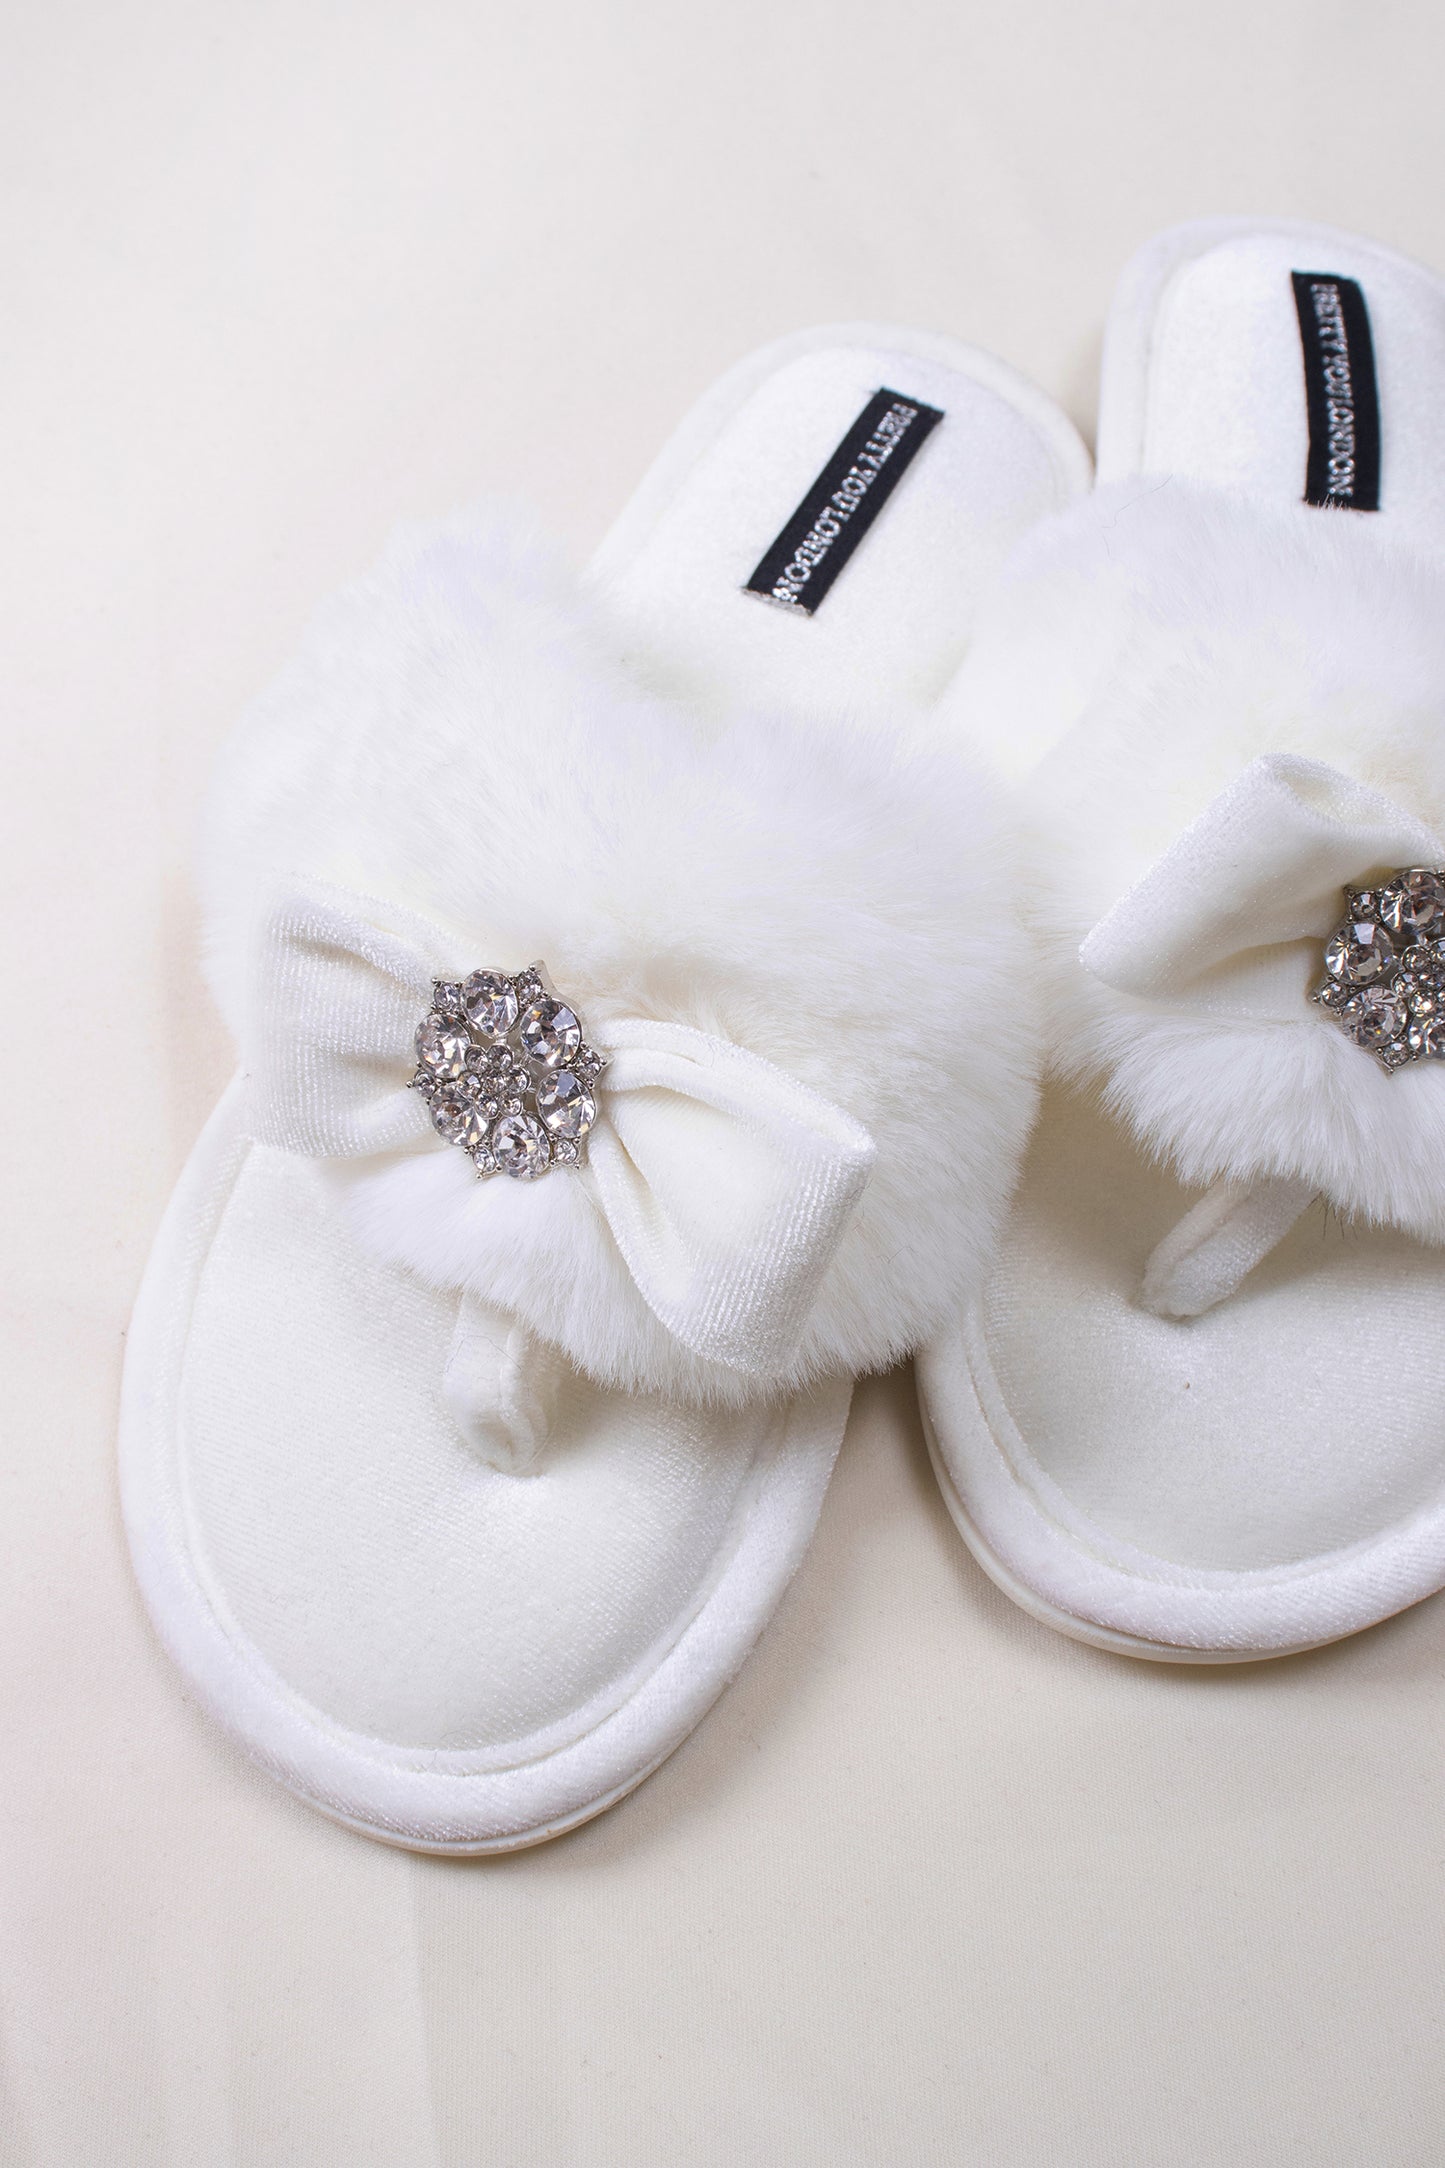 
                  
                    Amelie women's toe post slippers in cream with a premium velvet bow and diamante embellishment atop a plush faux fur band from Pretty You London
                  
                